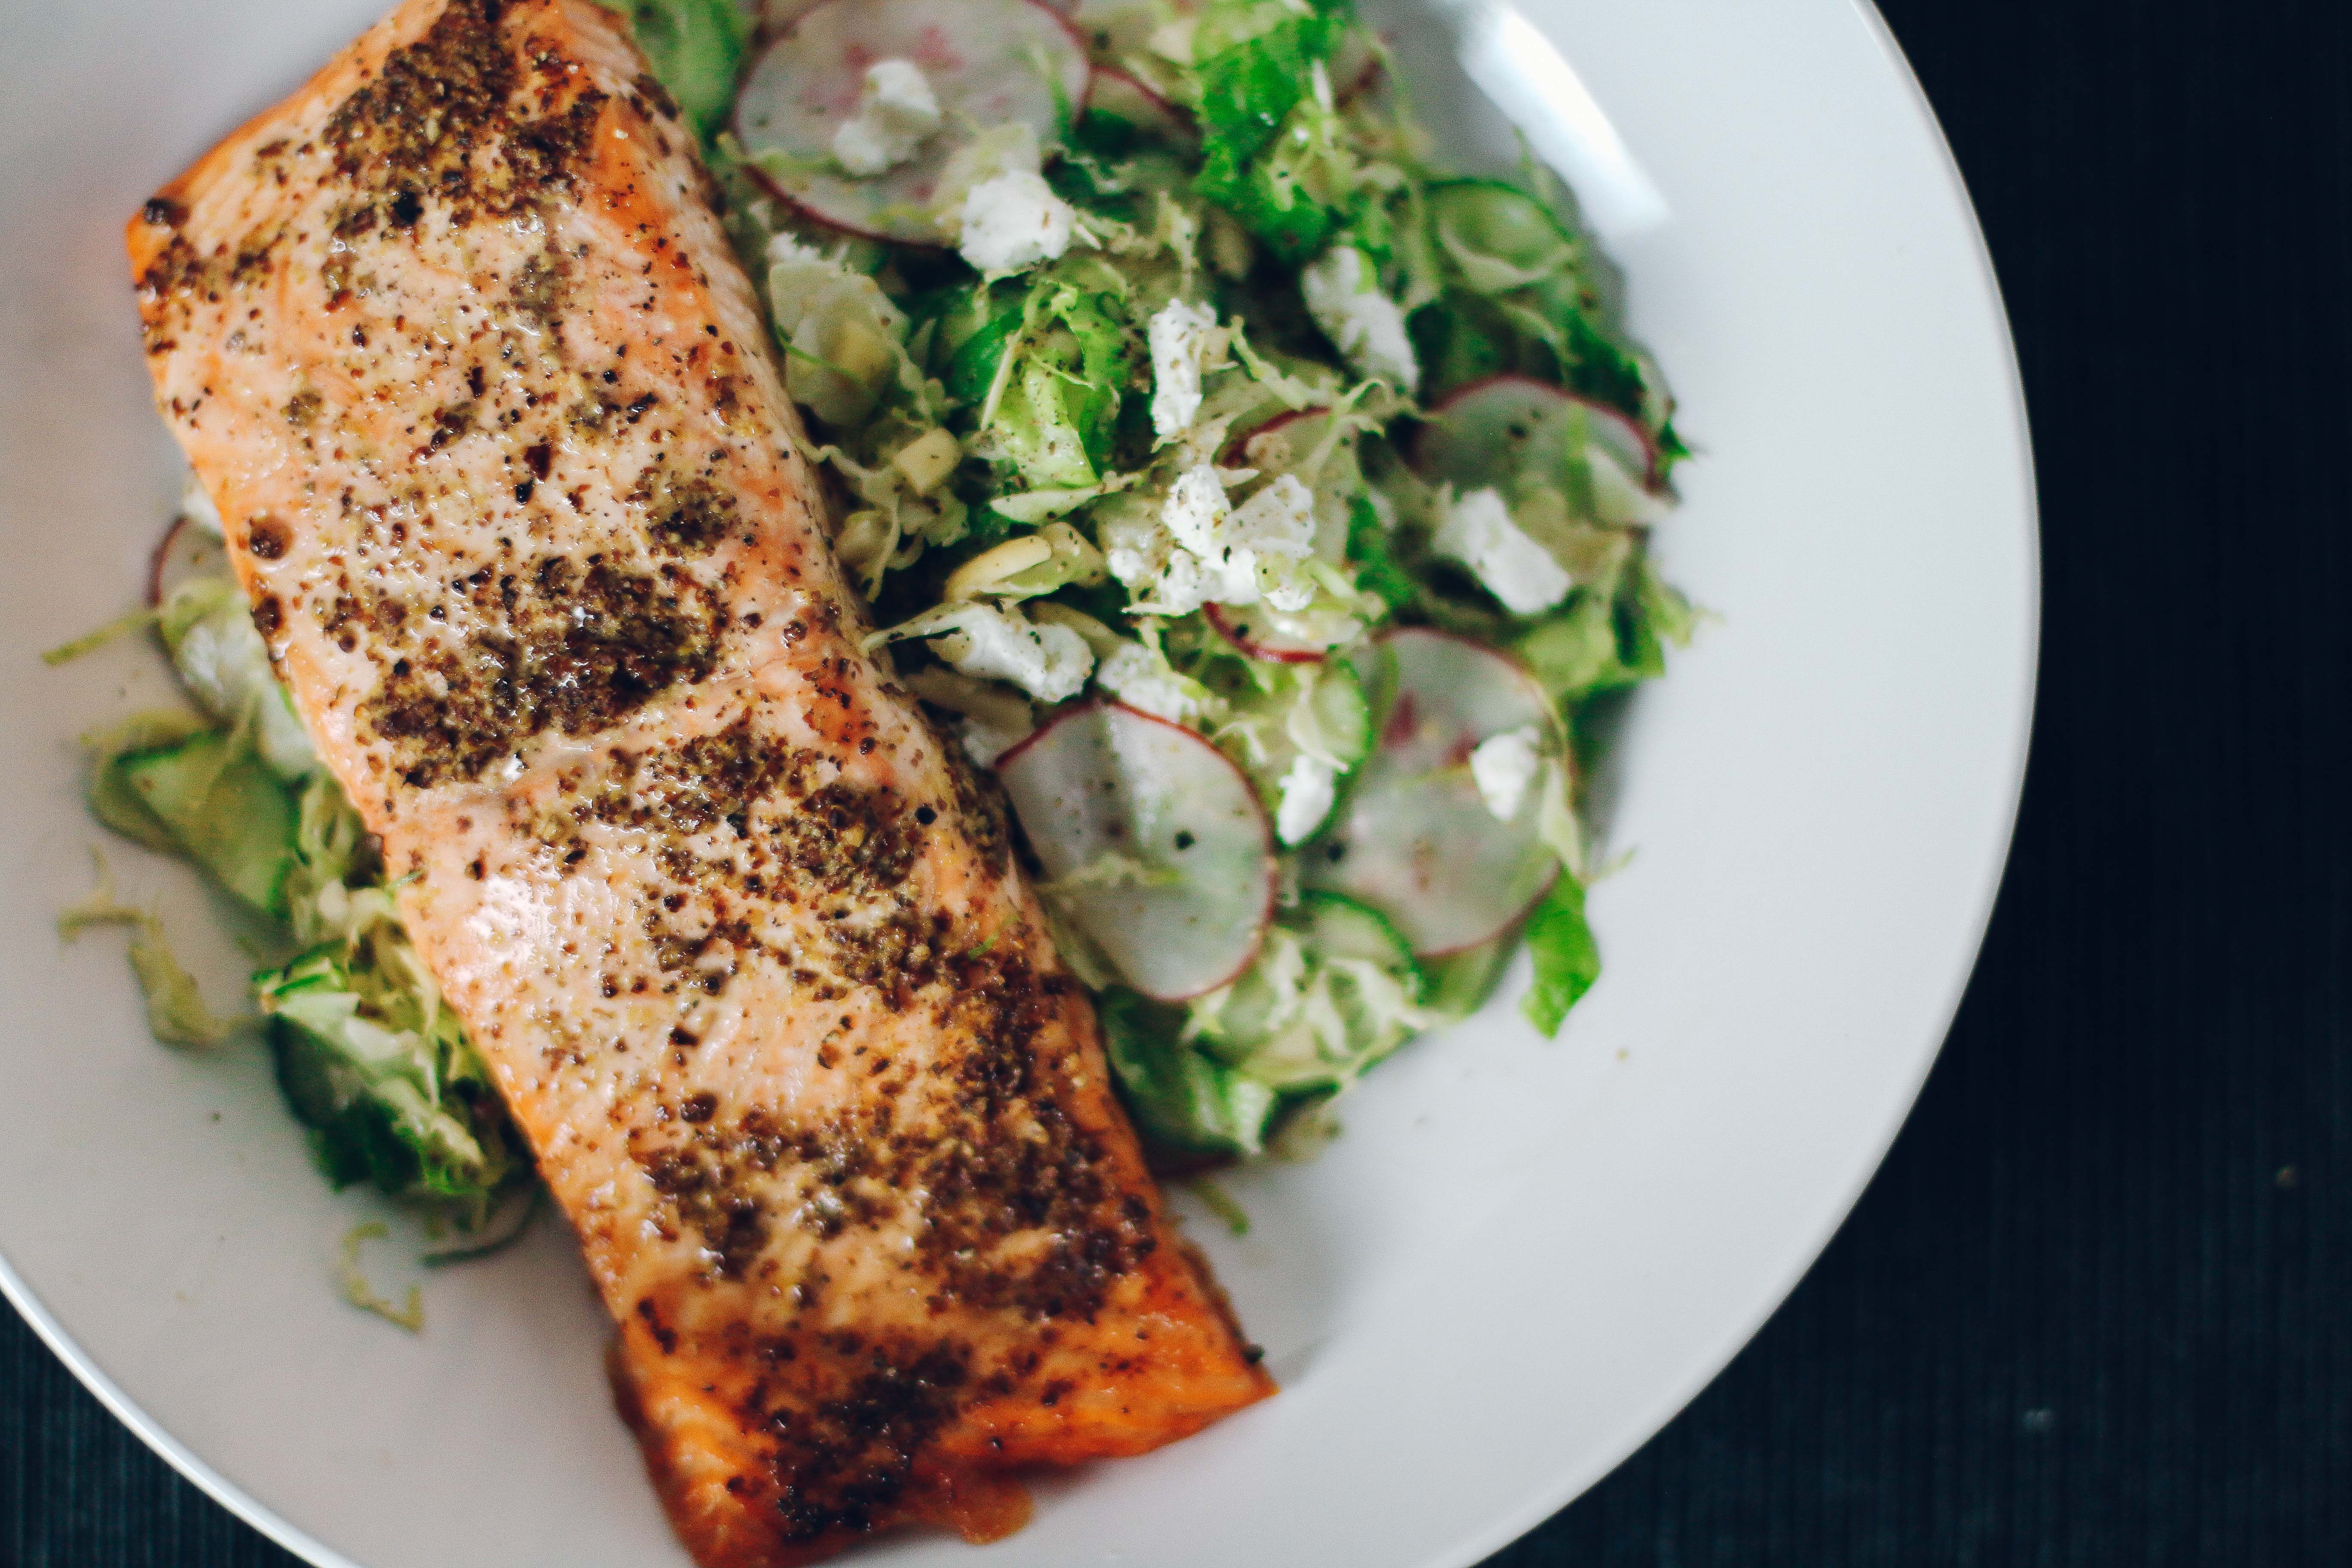 Mustard Salmon Chop Chop Salad with Goat Cheese & Almonds | I Will Not Eat Oysters